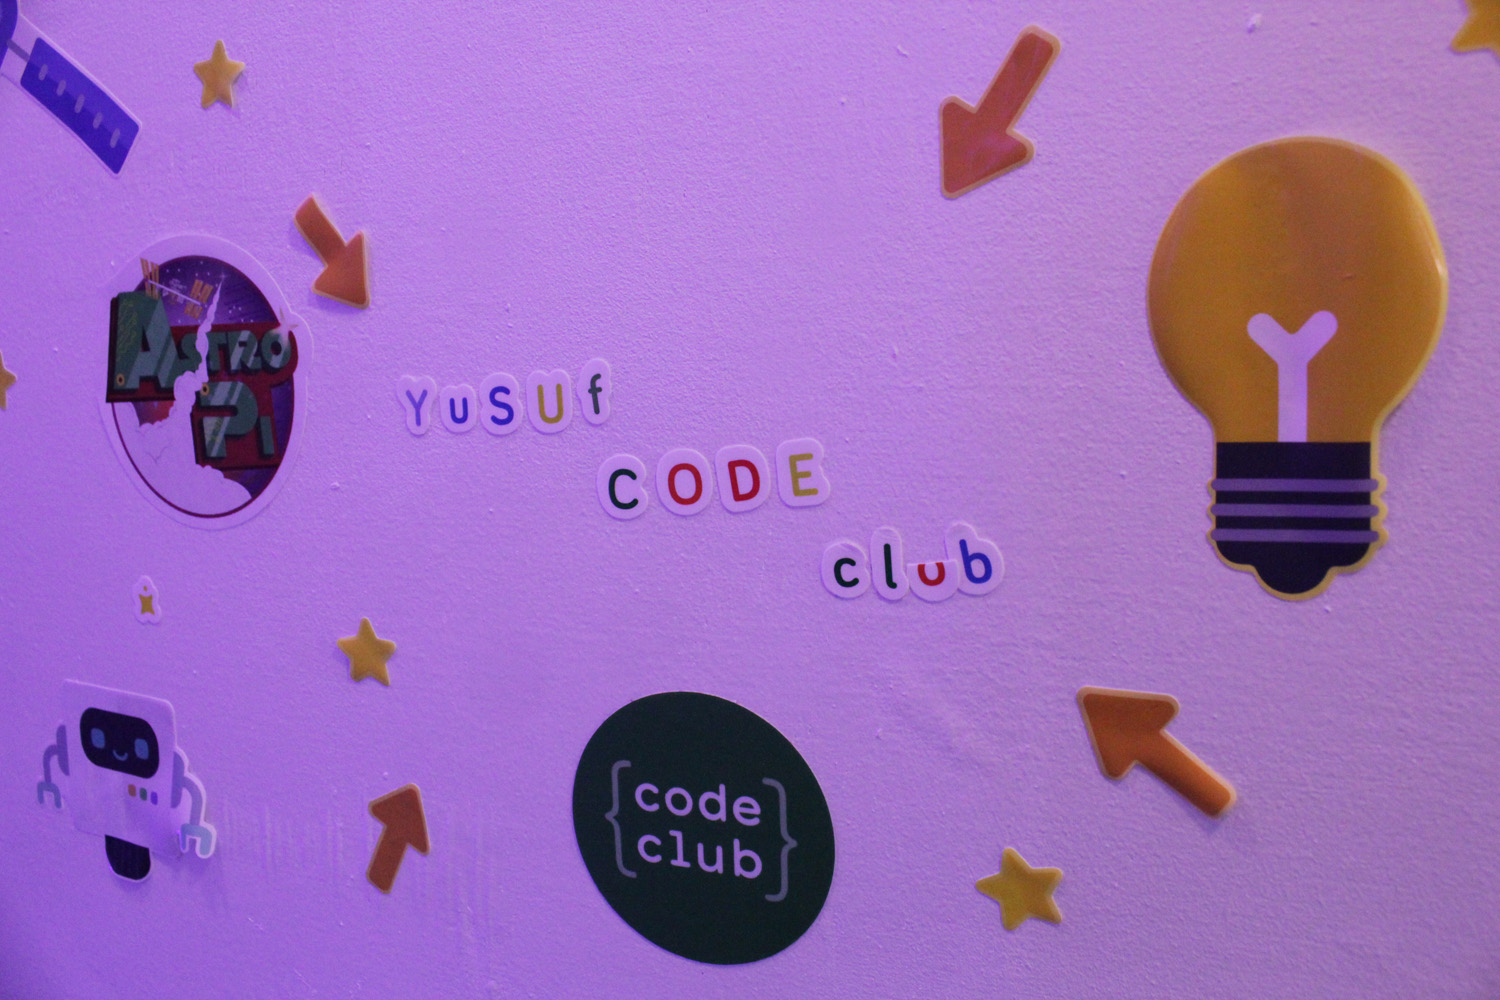 Detail of Yusuf's Dengineers den with 'Yusuf Code Club' stickers on the wall